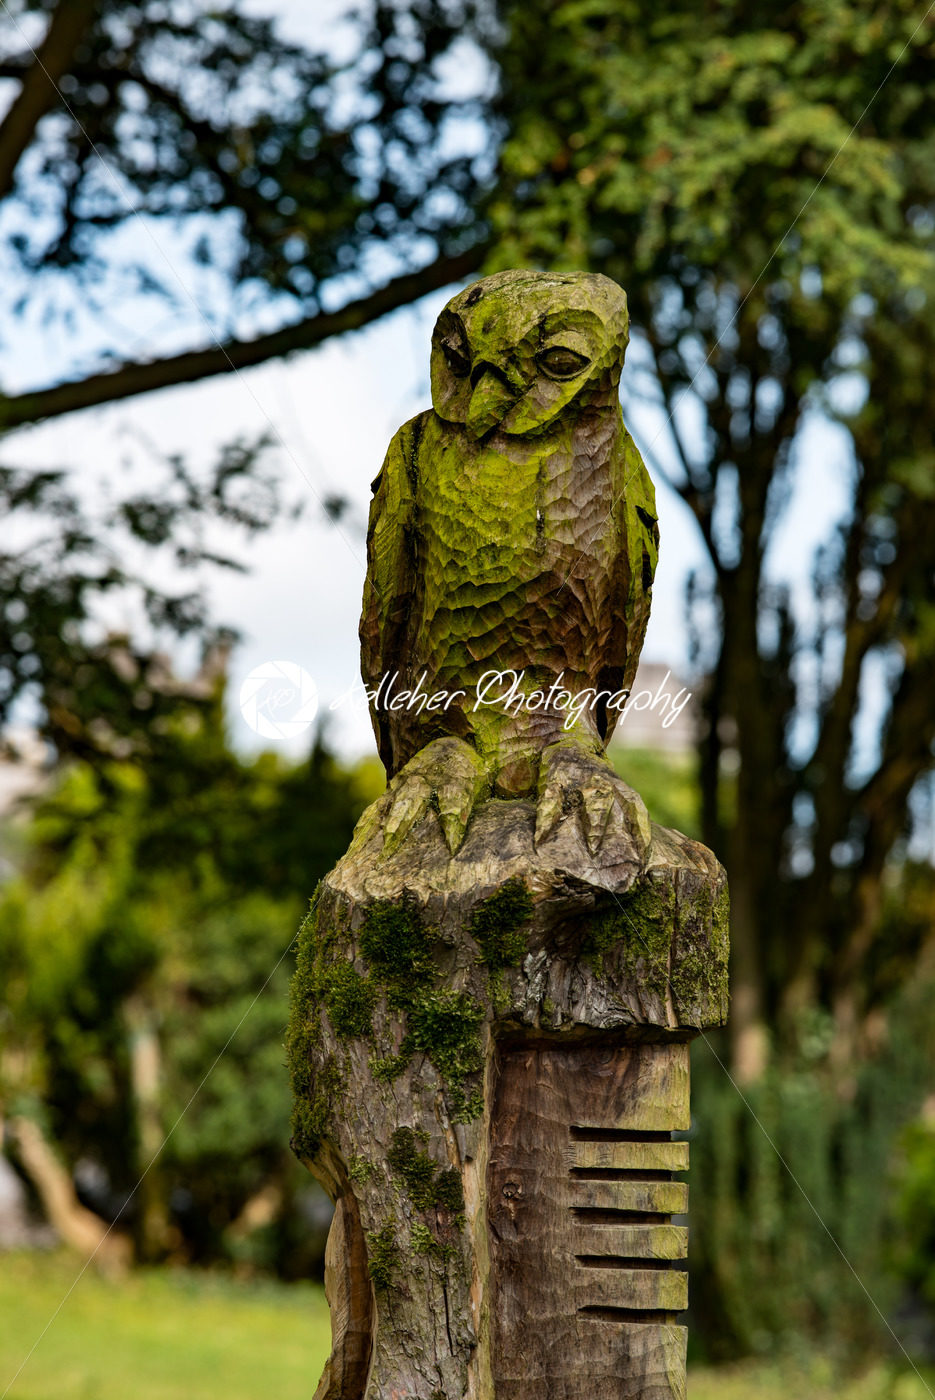 COUNTY OFFALY, IRELAND – AUGUST 23, 2017: Birr Castle Gardens in County Offaly, Ireland - Kelleher Photography Store